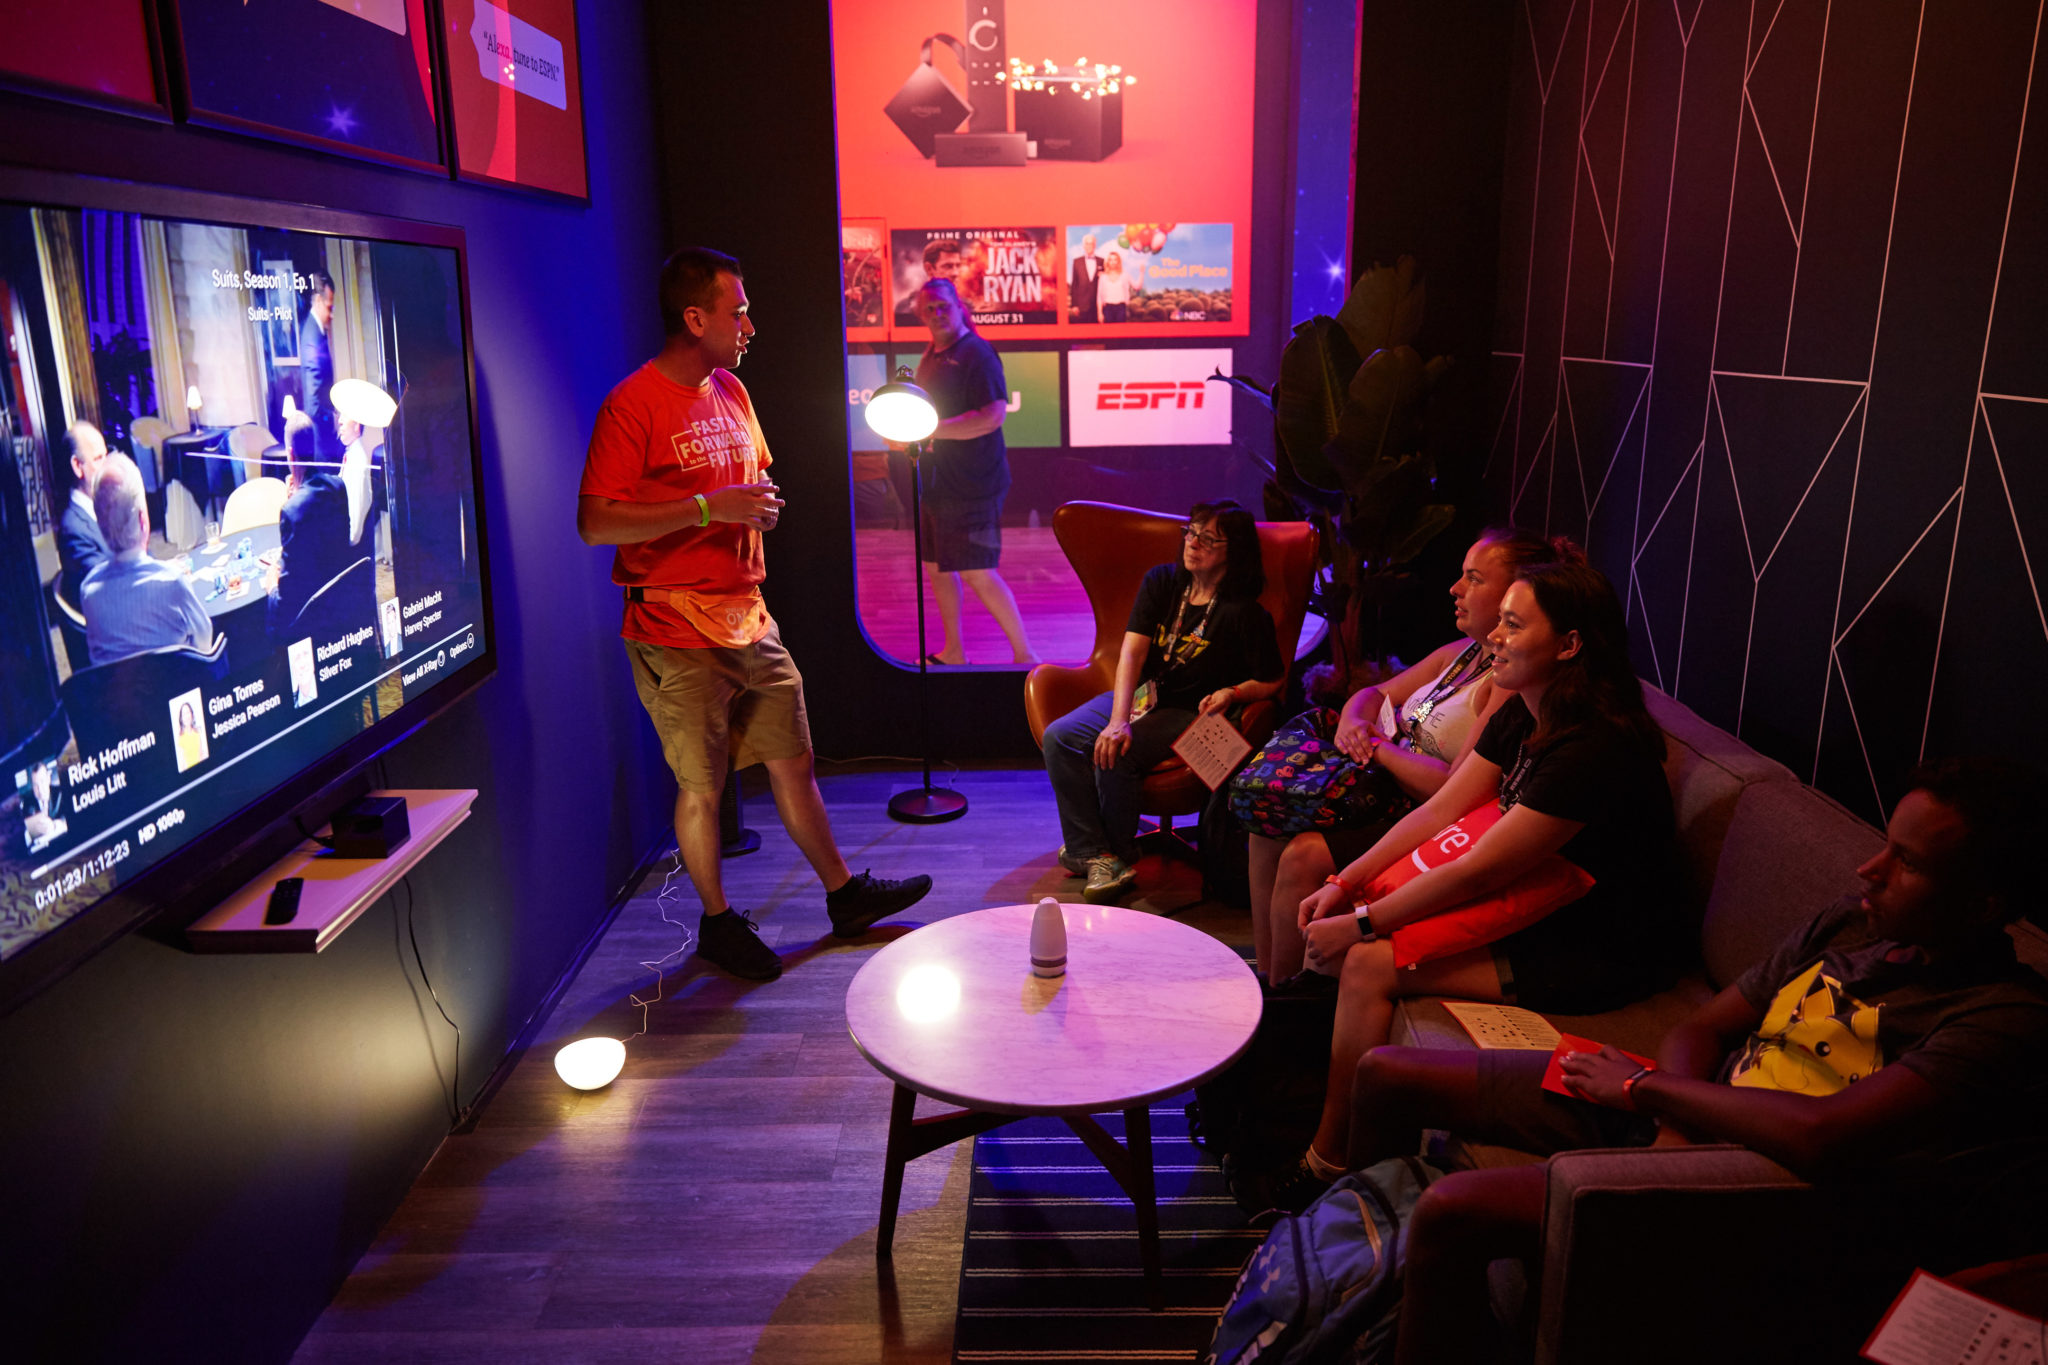 Amazon FIre TV - San Diego Comic Con 2018 Experiential Marketing Agency based in Los Angeles, California